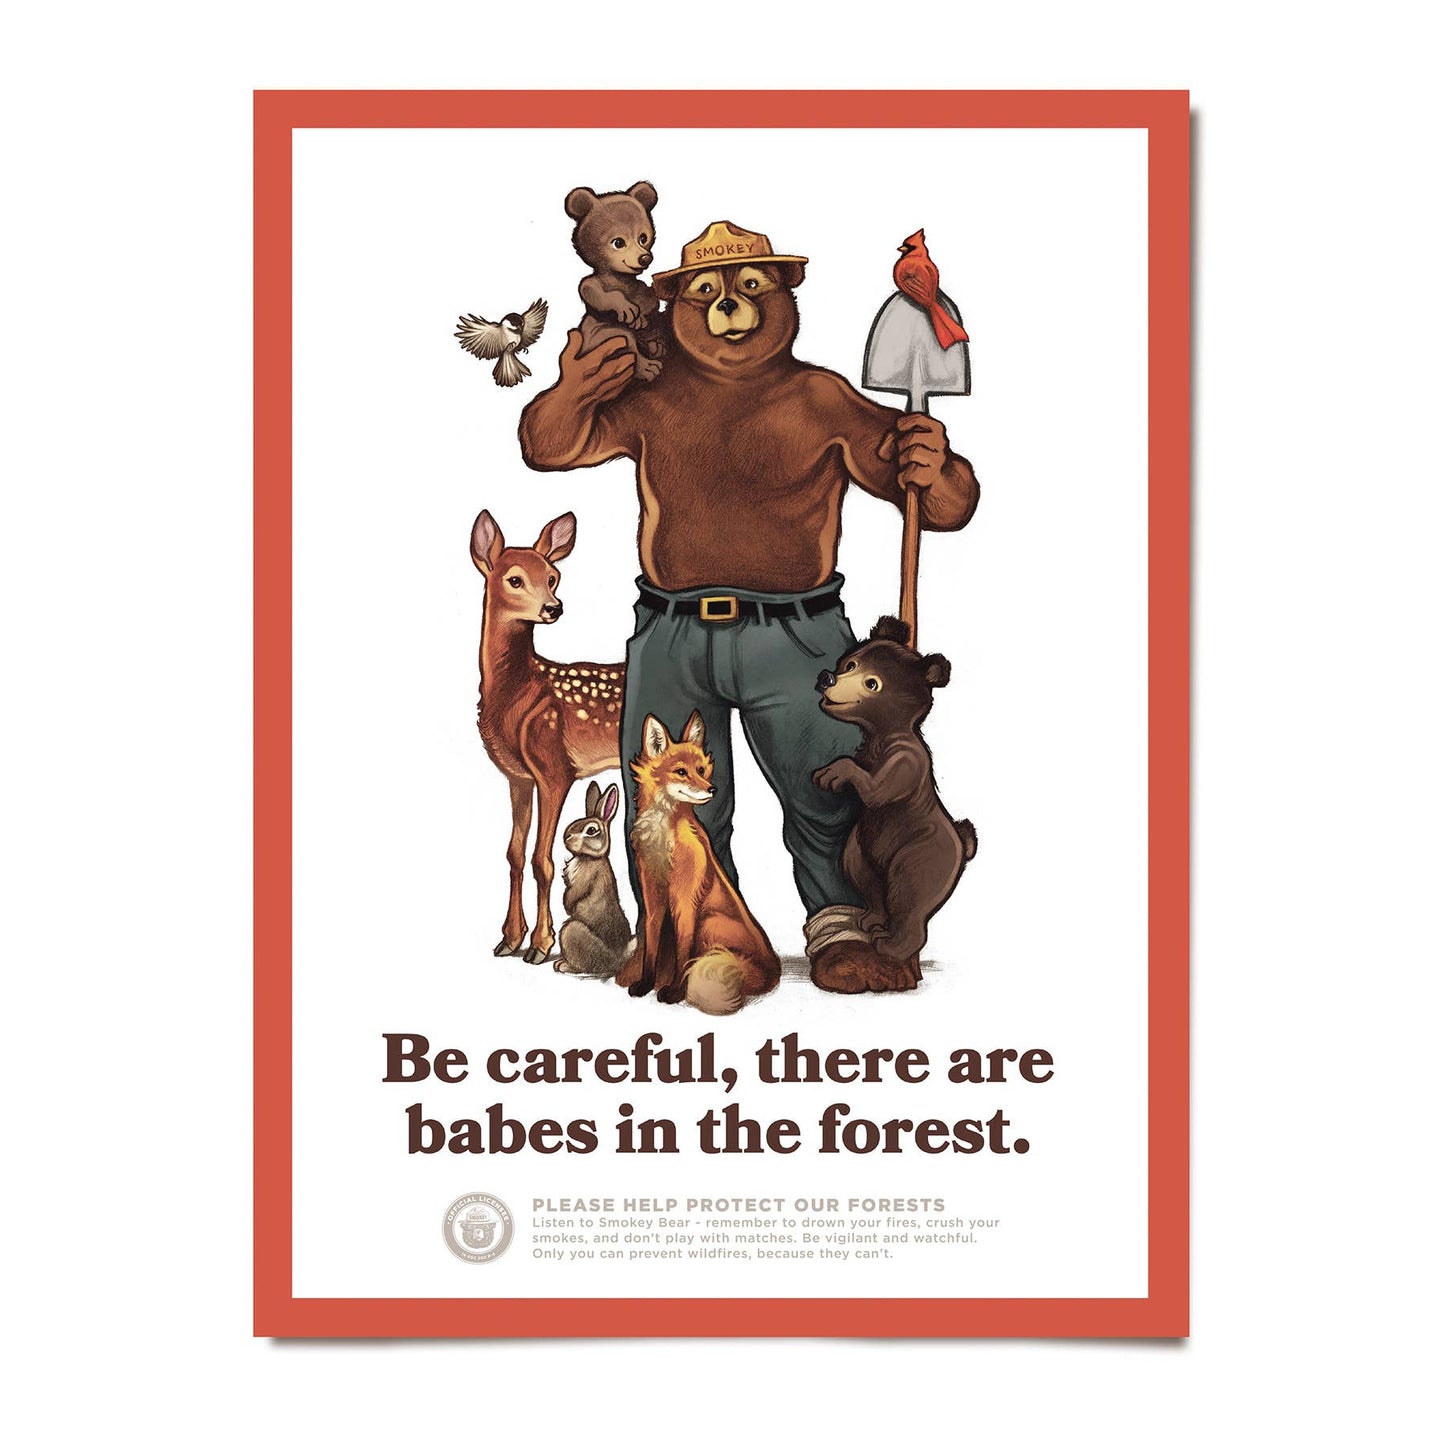 Babes in the Forest - 12x16 Poster